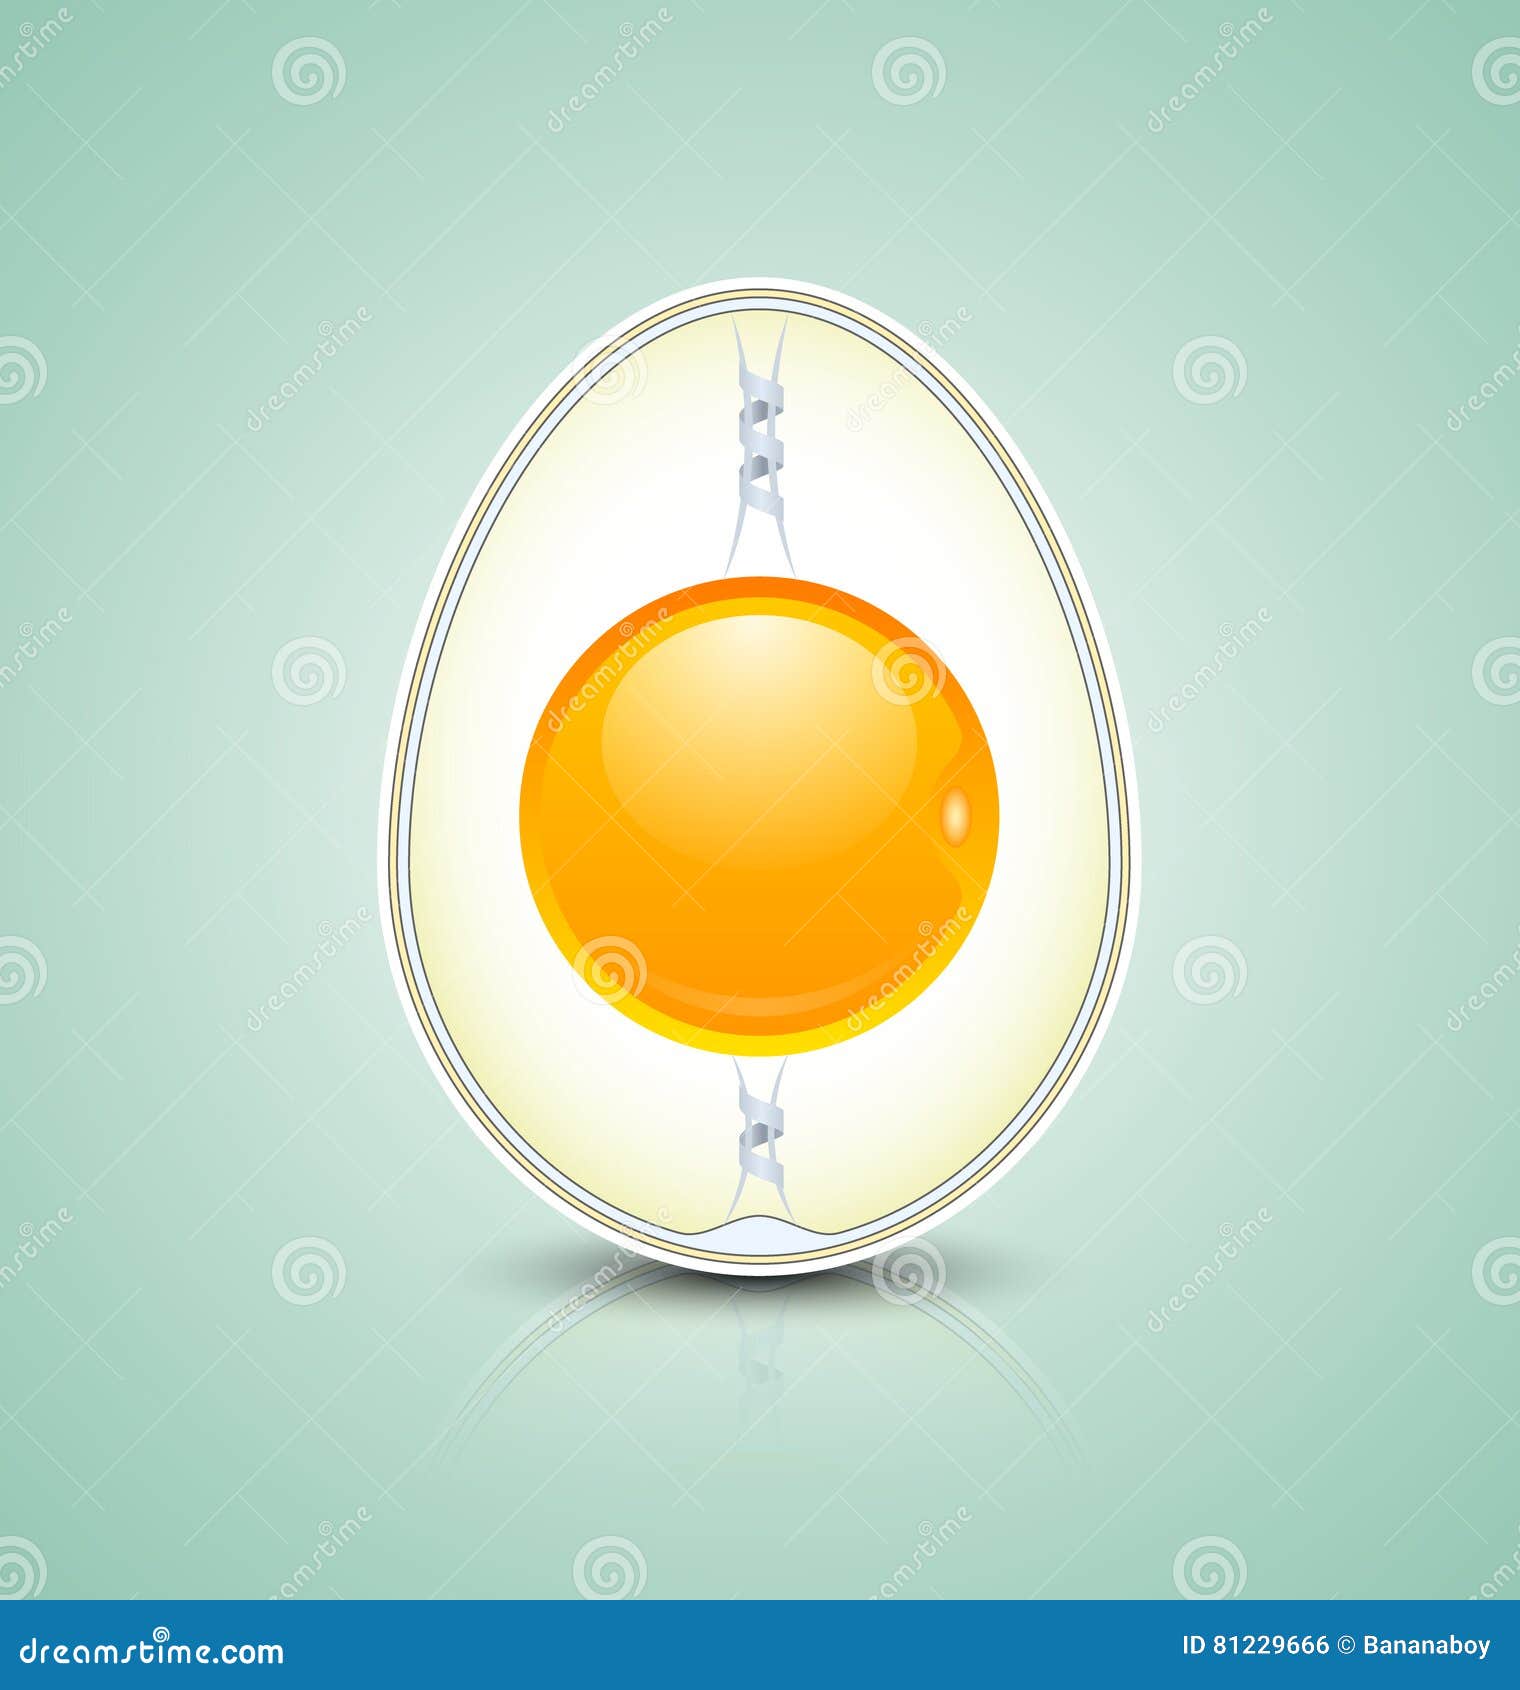 egg cross section icon